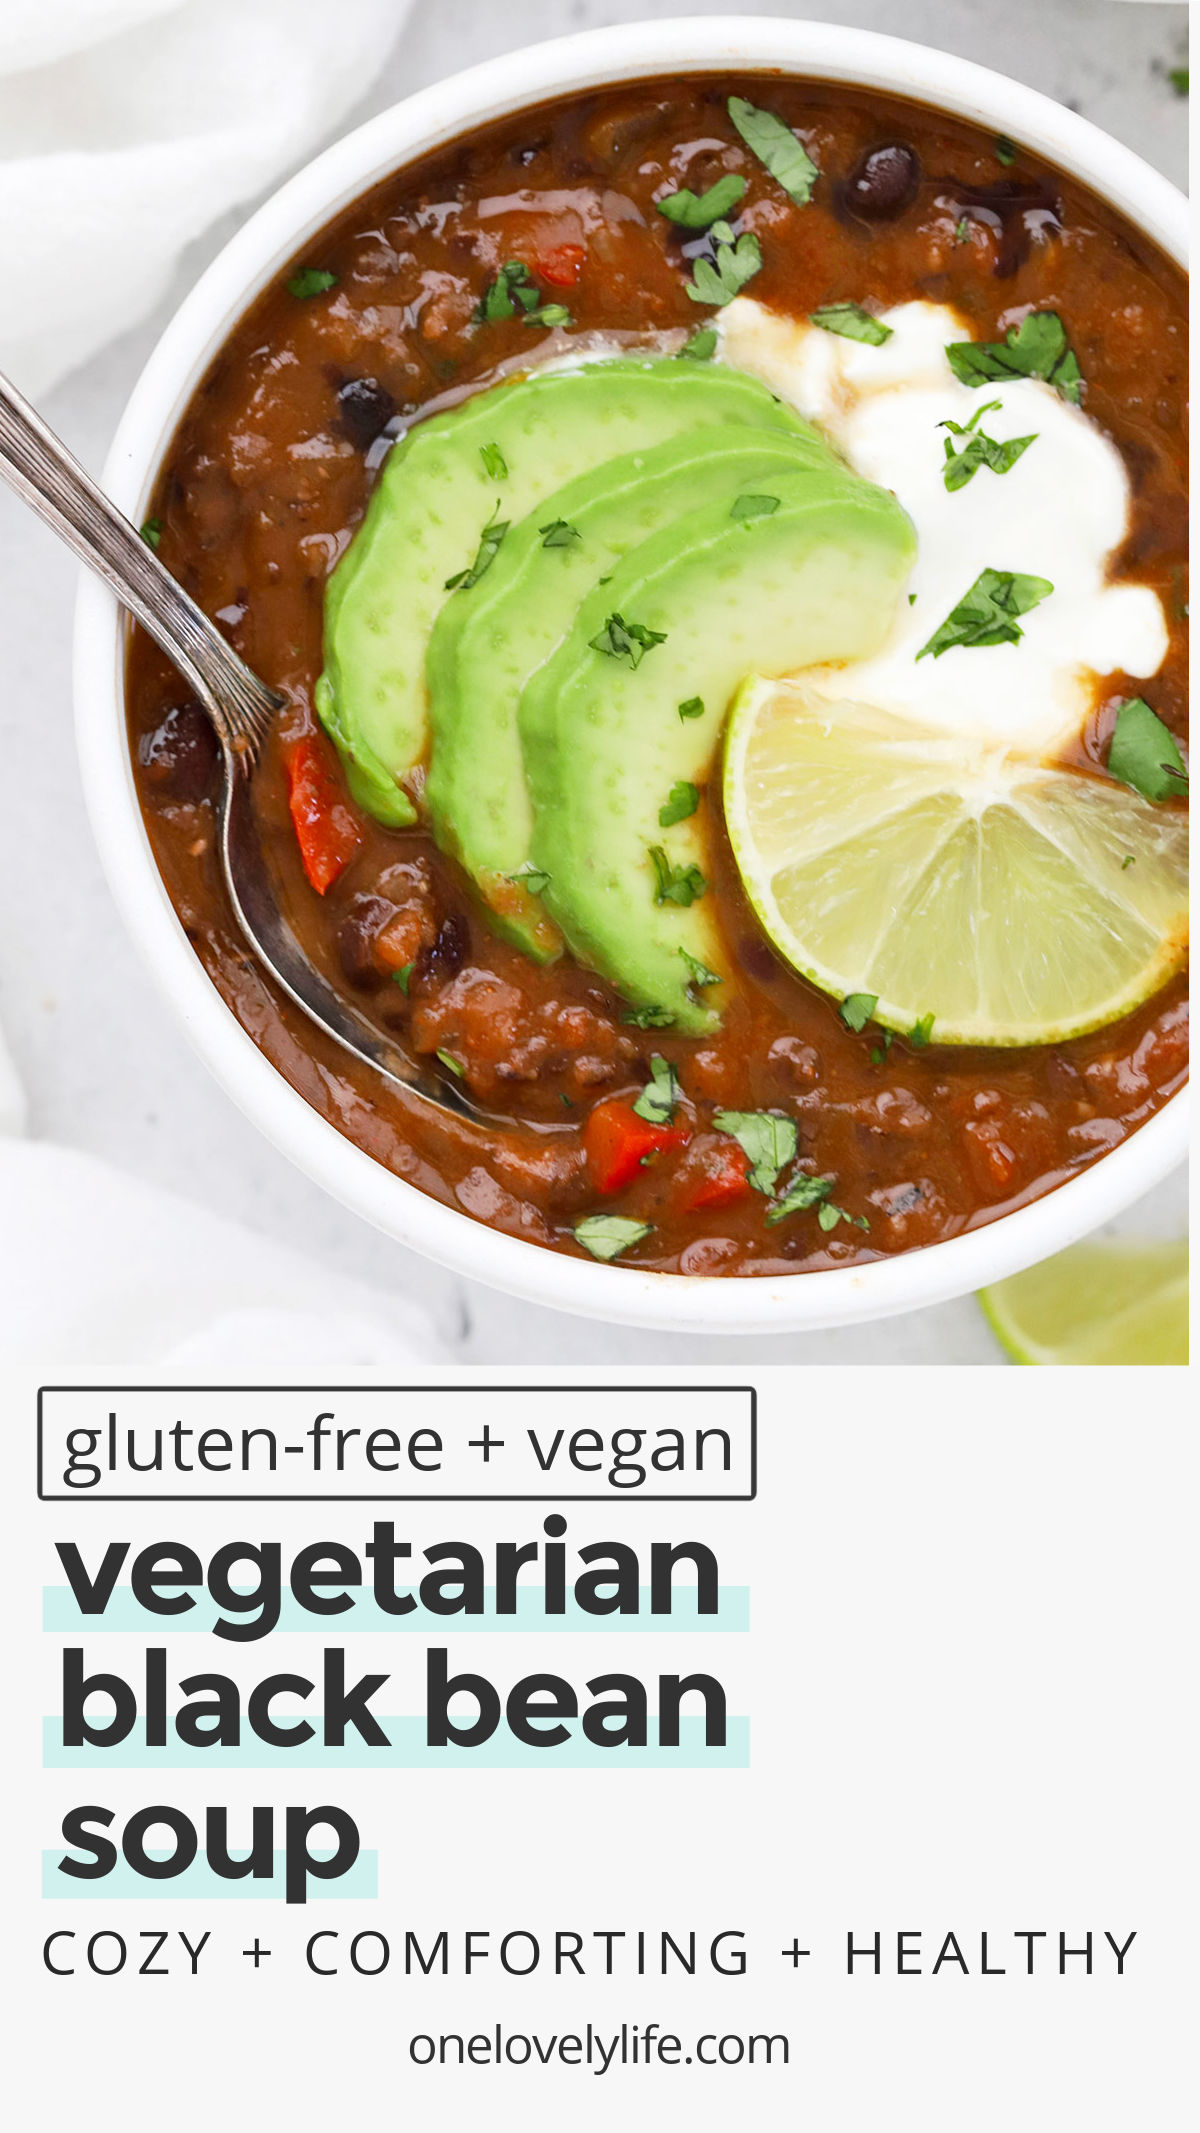 Easy Vegan Black Bean Soup - This healthy black bean soup is so simple to make! You'll love the colors and flavor. (Gluten free & vegan) // Vegetarian Black bean soup // bean soup recipe // vegan soup // vegetarian soup // healthy soup // vegan chili // black bean chili // healthy dinner #healthydinner #healthysoup #vegan #vegetarian #blackbeansoup #meatlessmonday